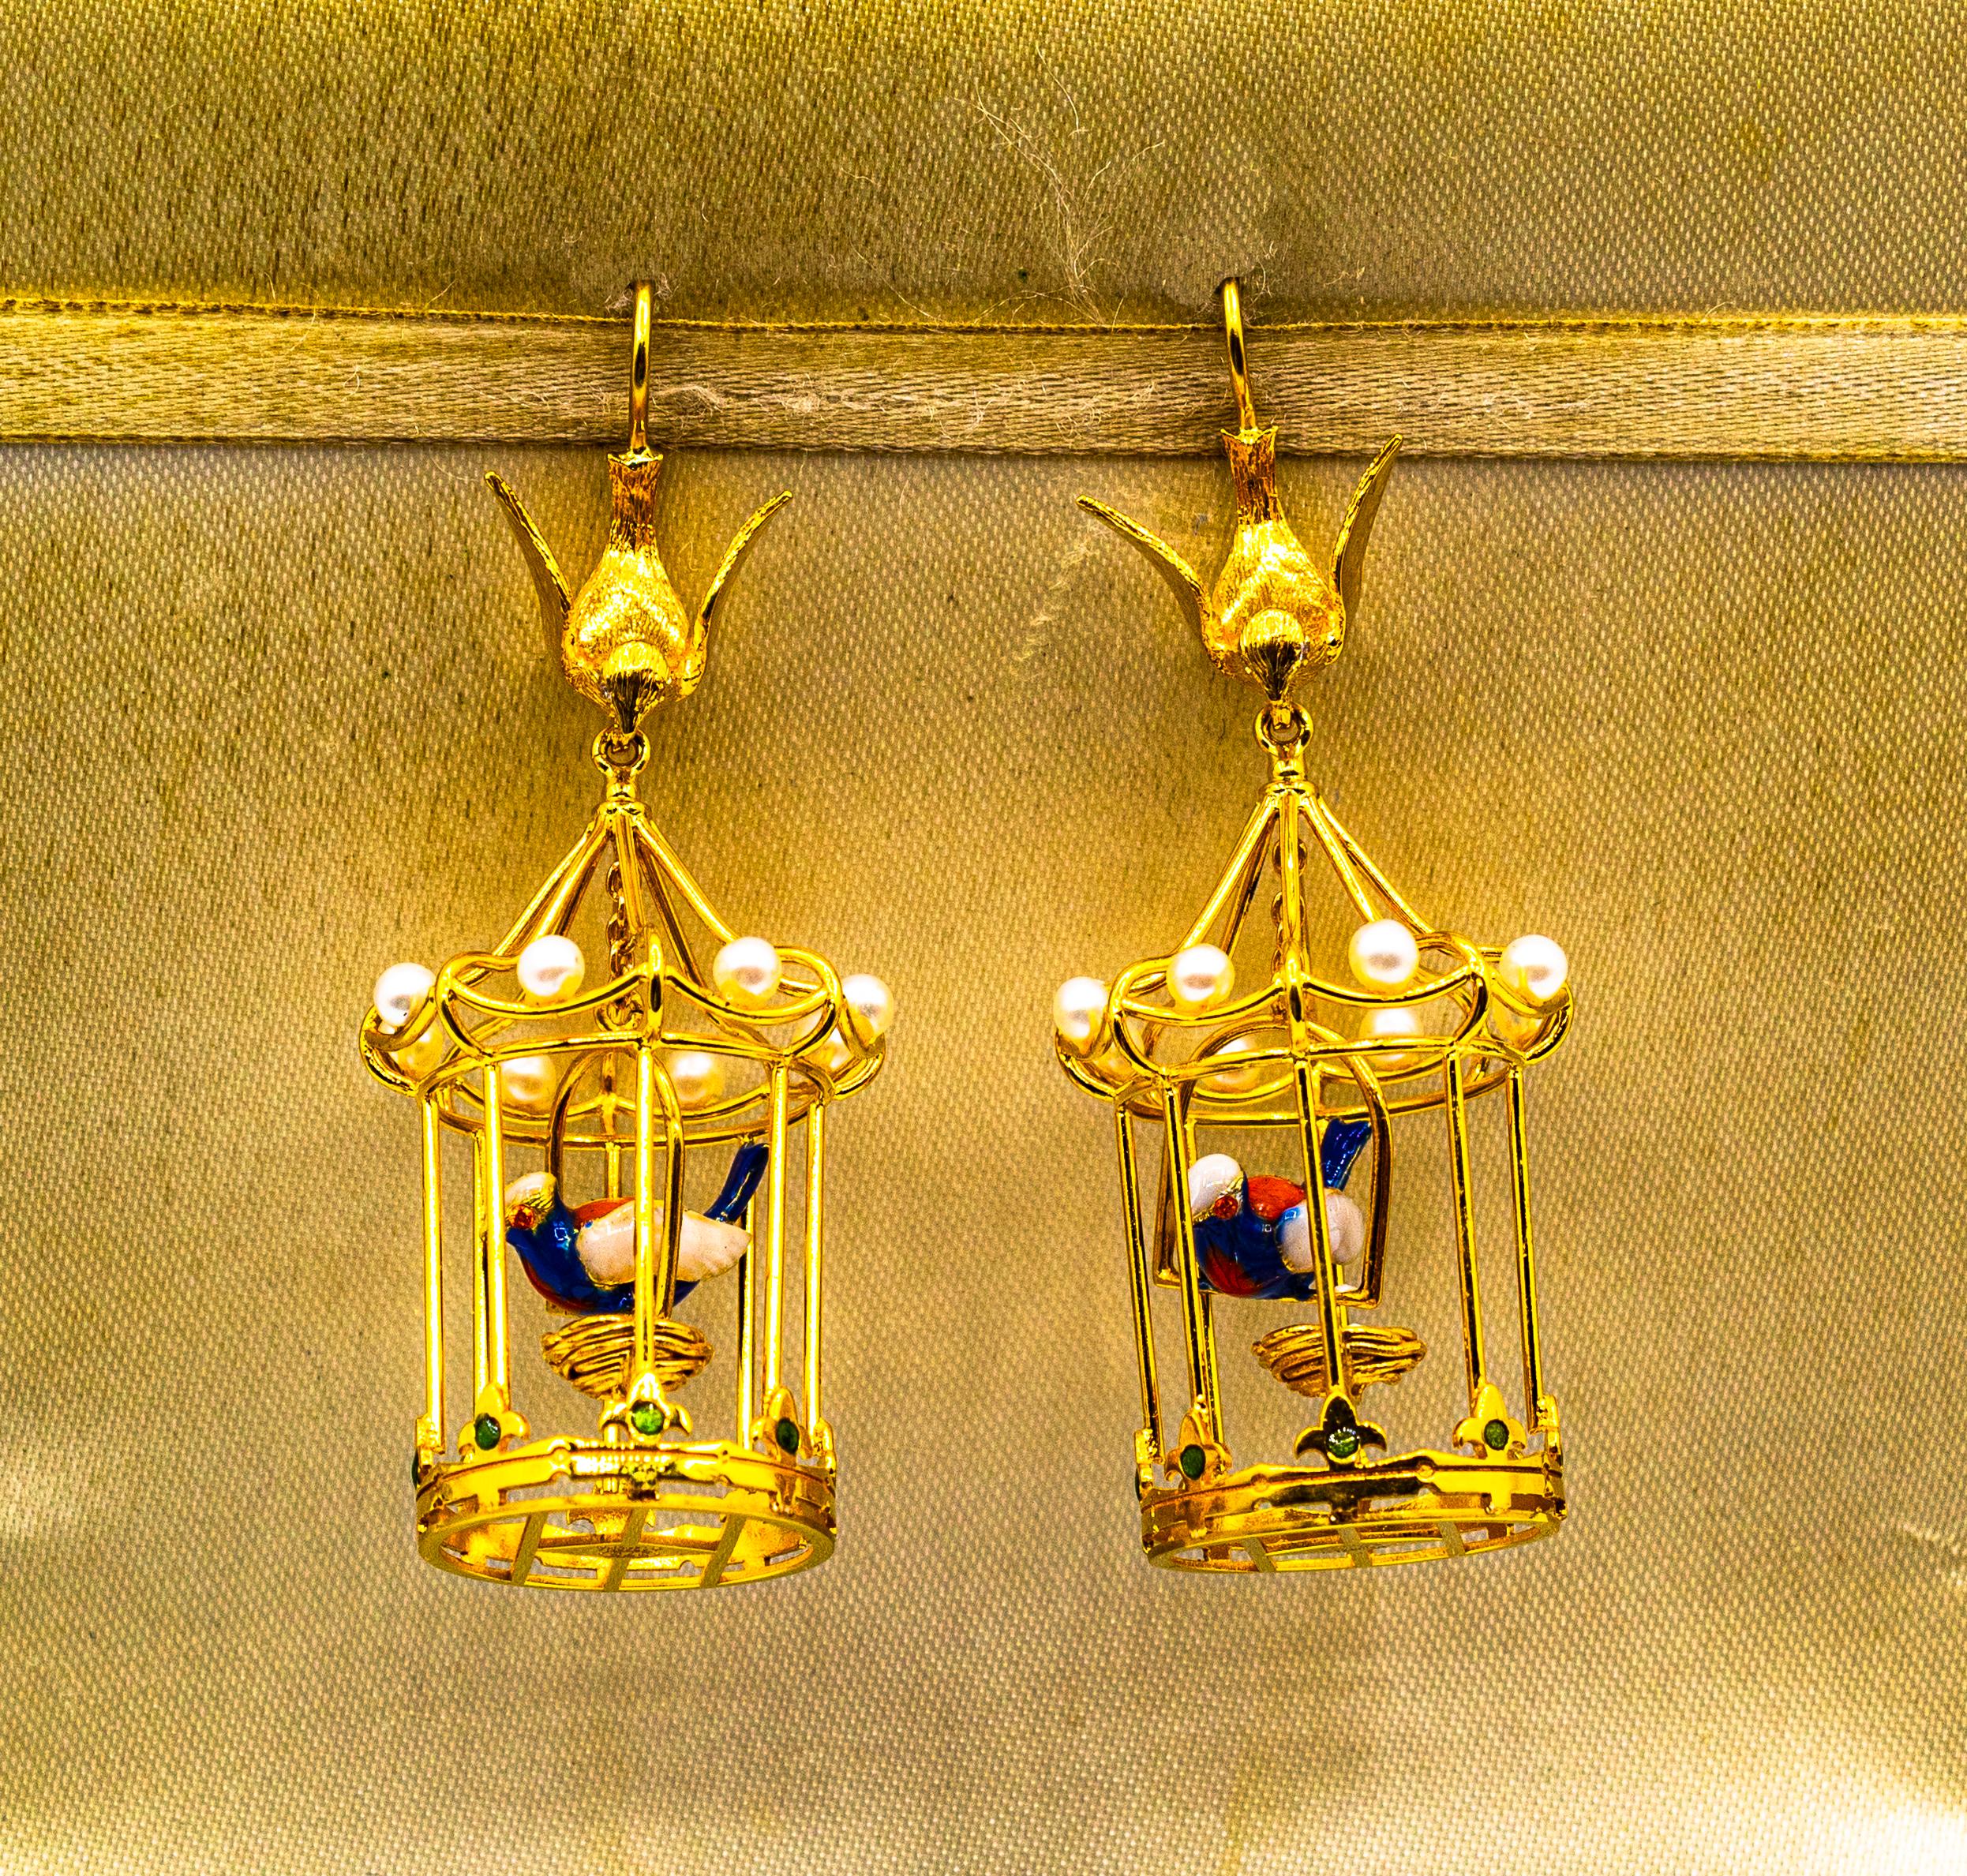 These Stud Earrings are made of 9K Yellow Gold.
These Earrings have 0.04 Carats of White Brilliant Cut Diamonds.
These Earrings have also Enamel and Pearls.

All our Earrings have pins for pierced ears but we can change the closure and make any of